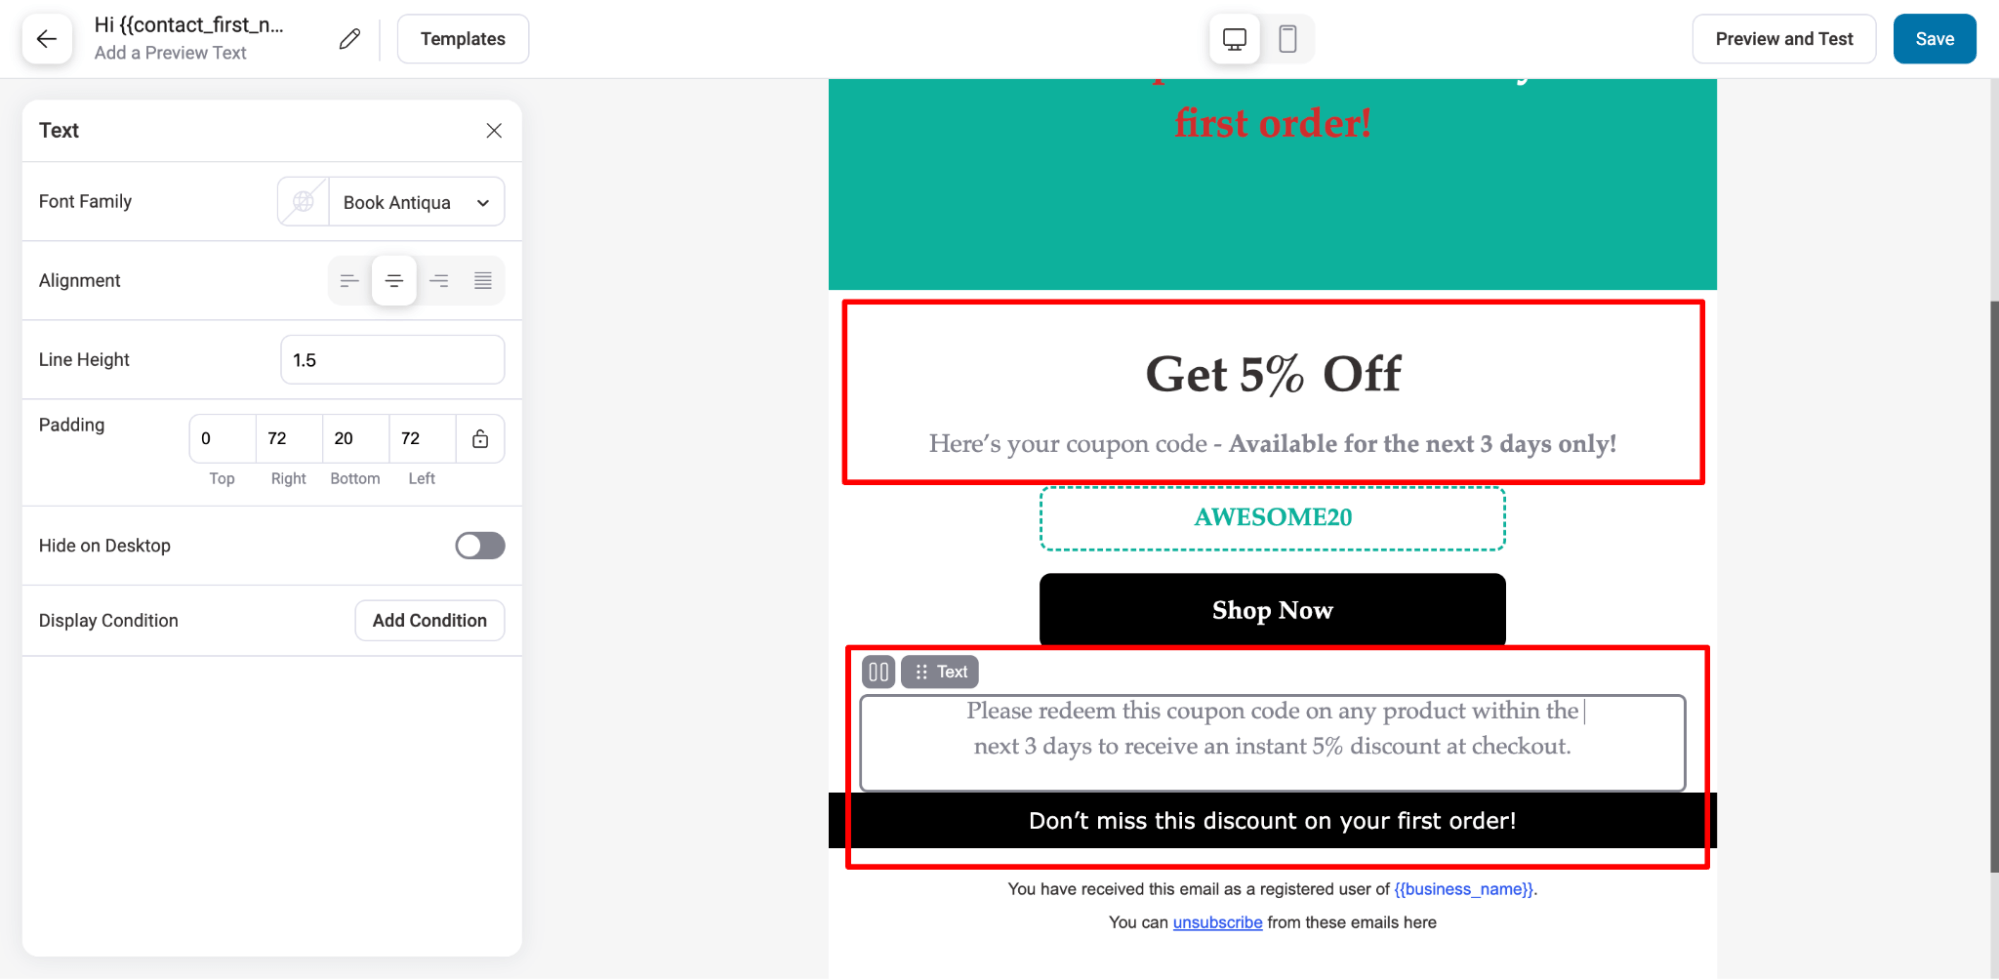 update related text according to the discount you are offering